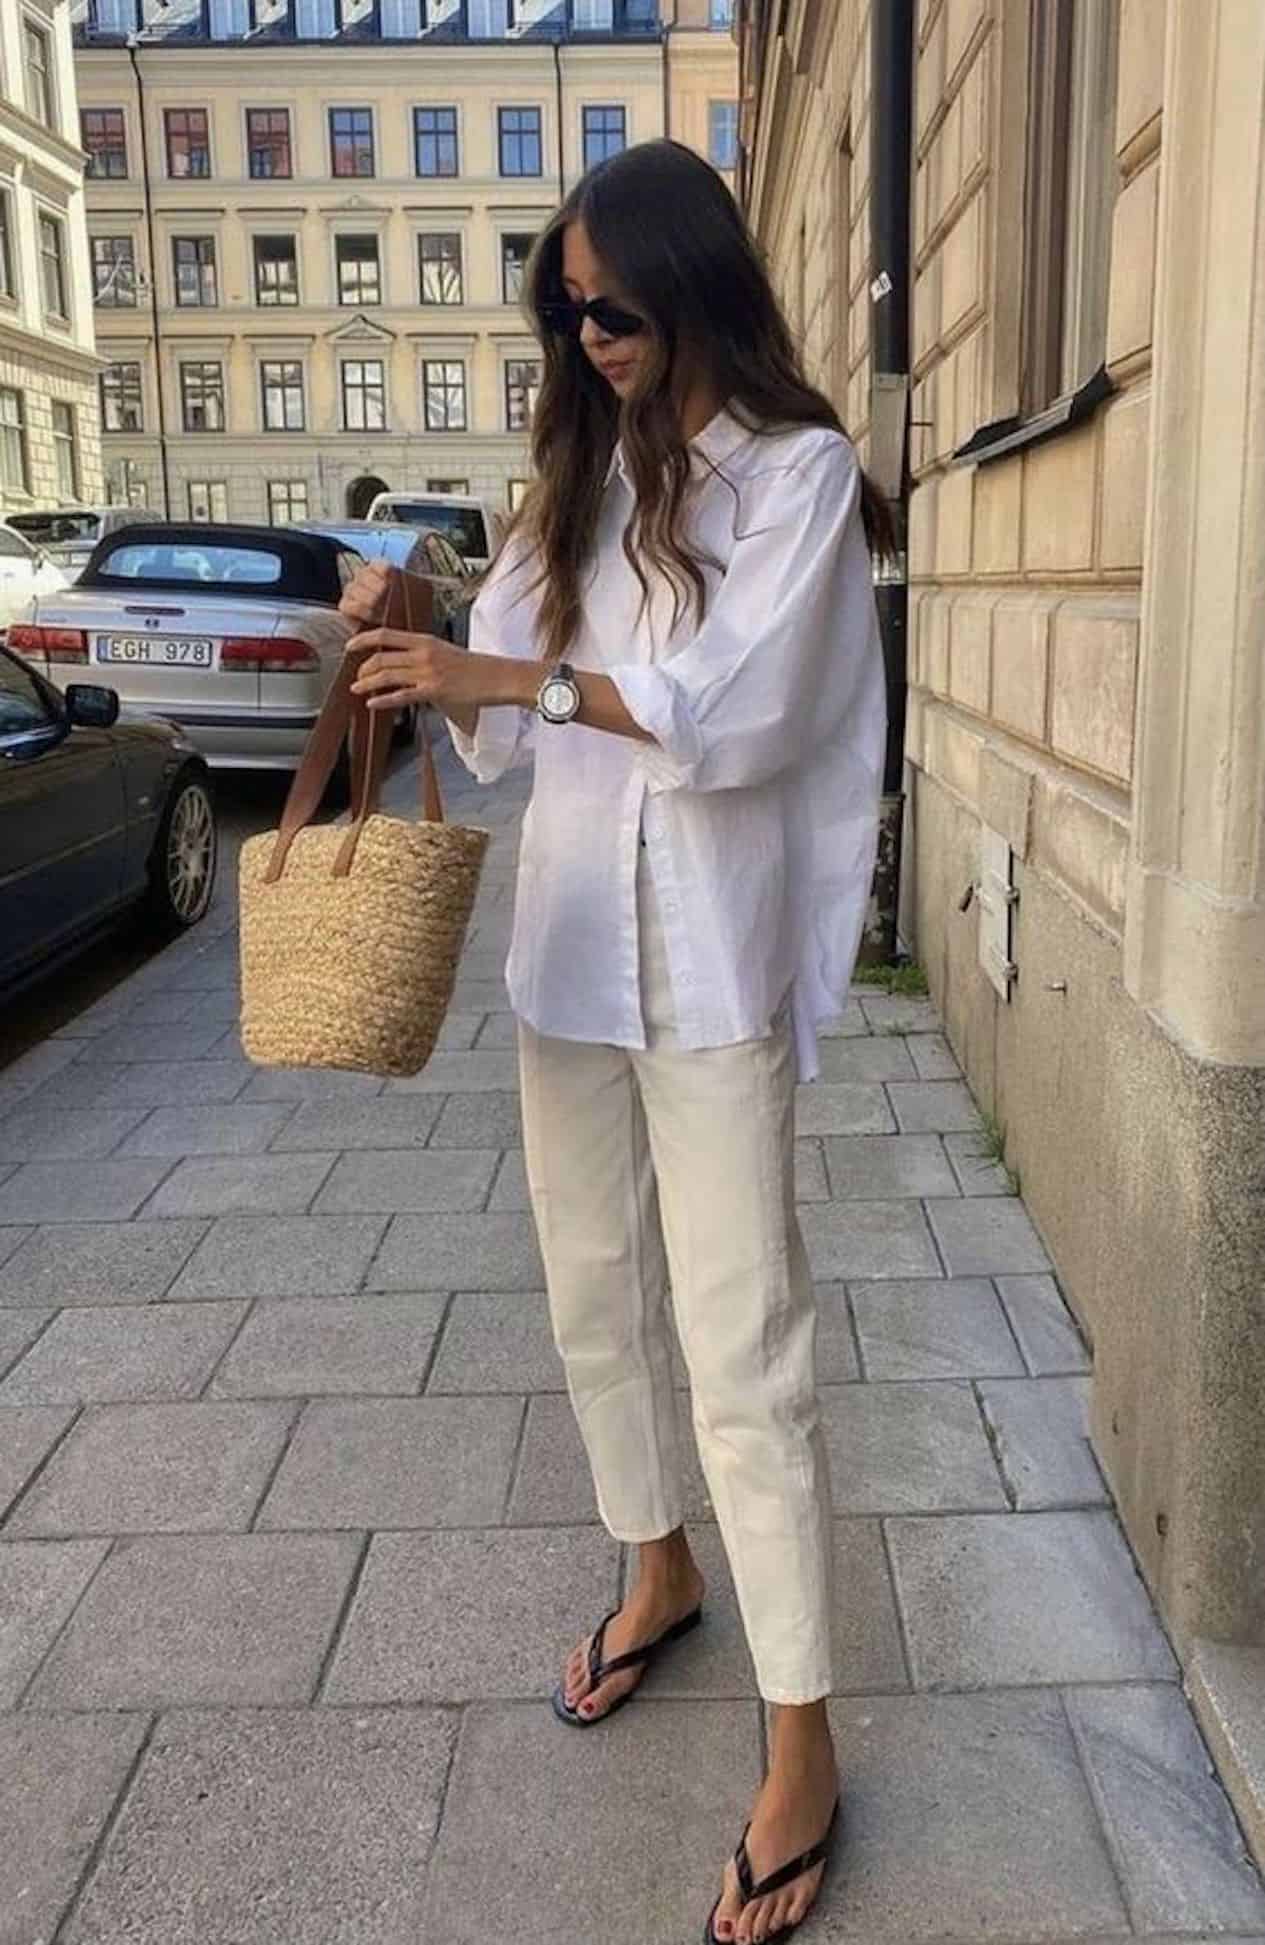 image of a woman standing on a sidewalk wearing a white button up shirt, cream pants, and black sandals, with a small straw bag